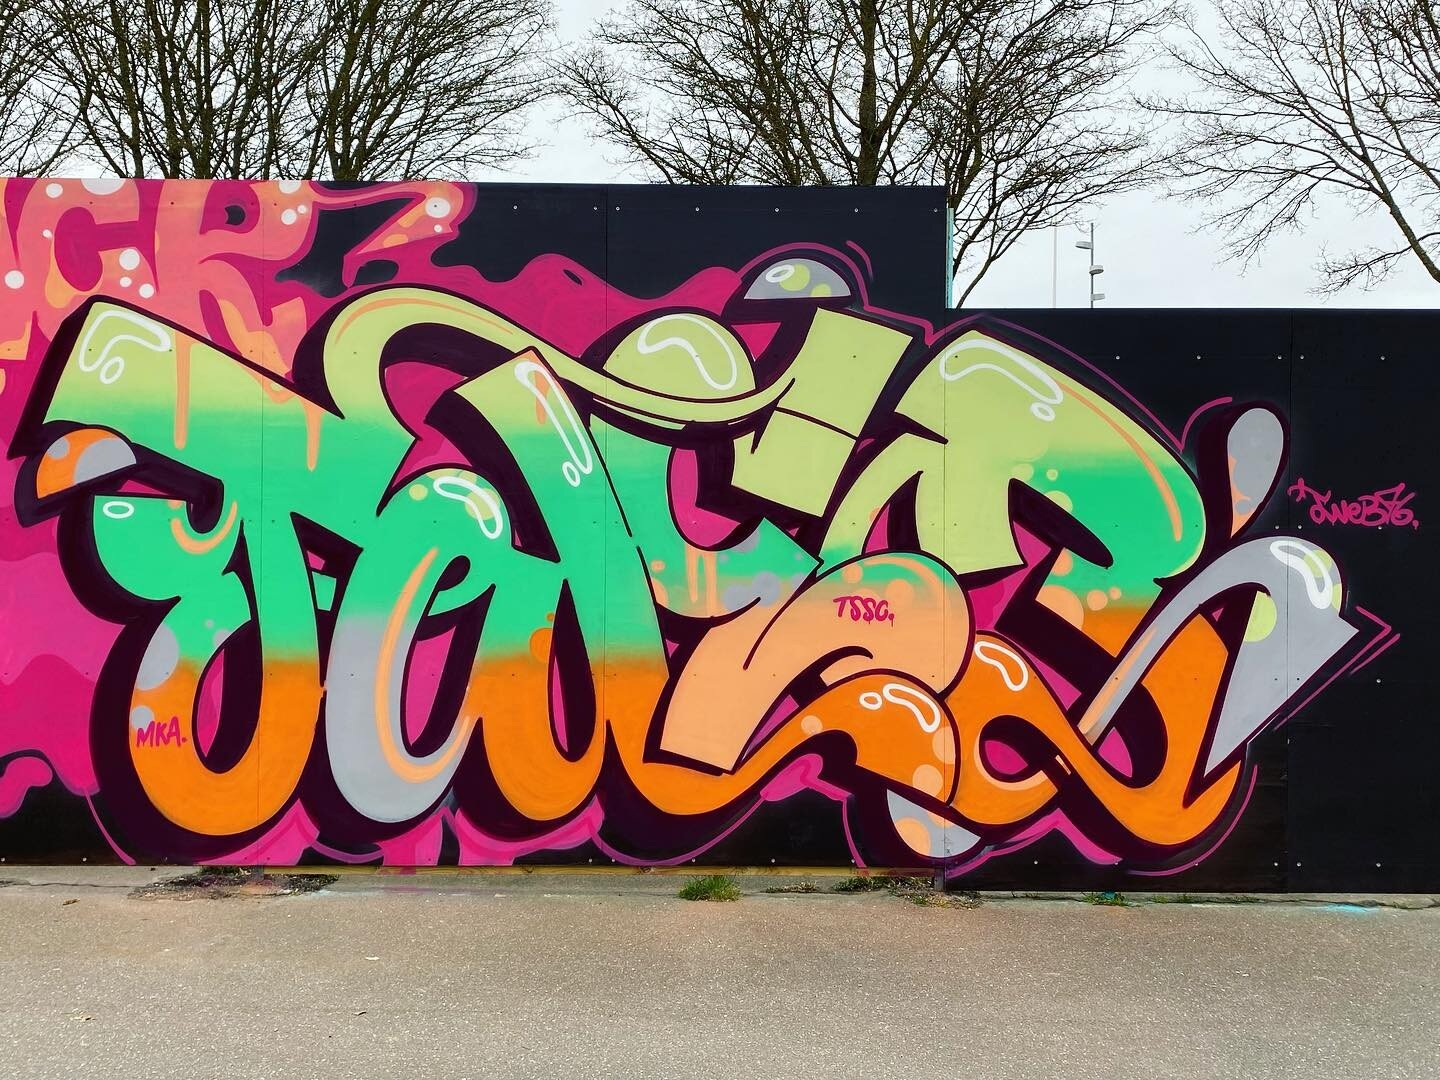 Fridays Sprays &hellip;
Always time well spent with brother Pheo @clicks05 🙏🏼
.
.
.
#Tweb76 #thesouthsidecrew #clickfamily #graffiti #2022 #lyngby #hiphop #dontstop #graffitibloc #keepingitup #denmark